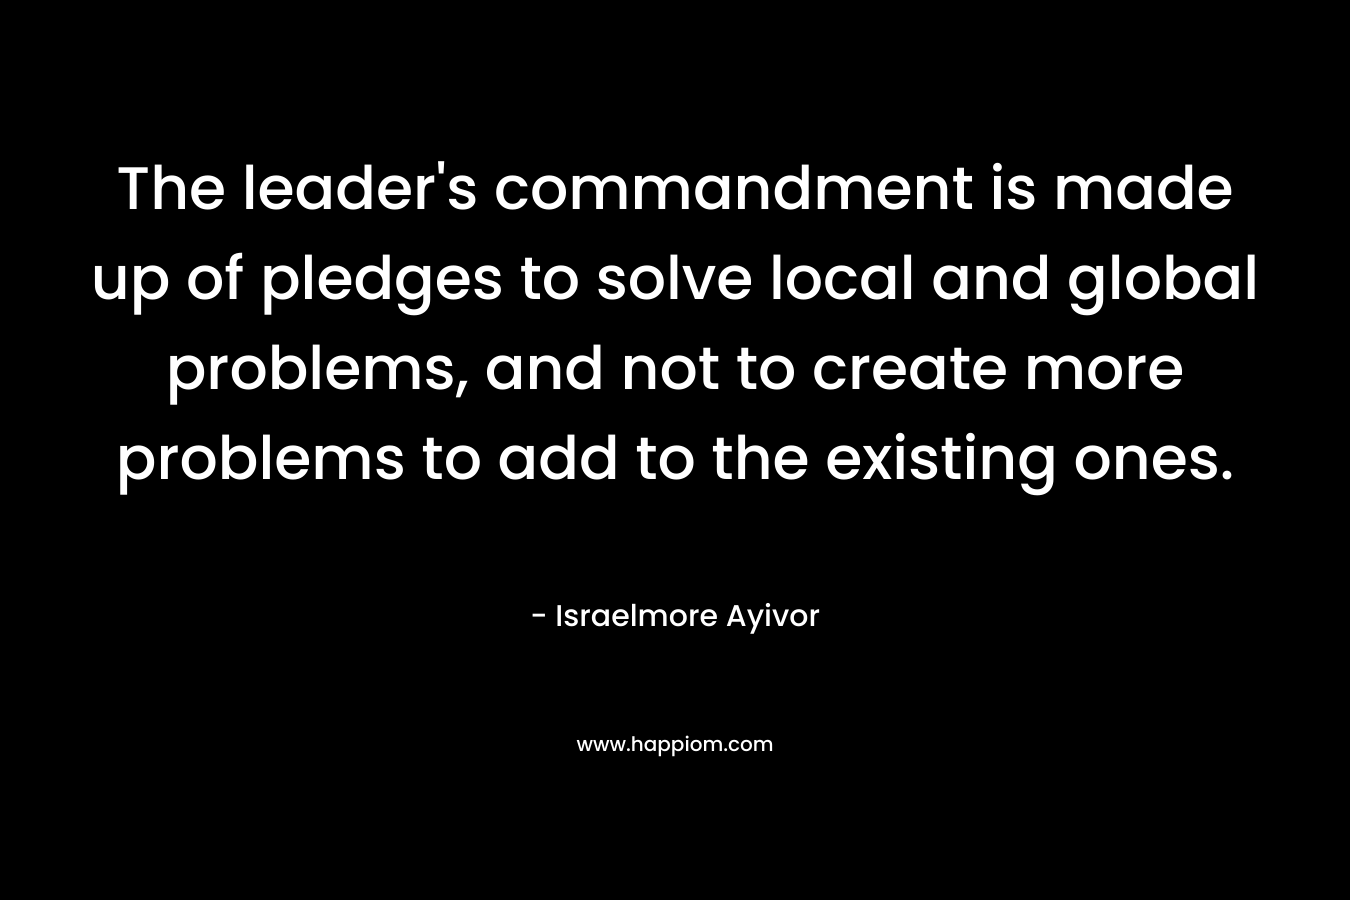 The leader's commandment is made up of pledges to solve local and global problems, and not to create more problems to add to the existing ones.